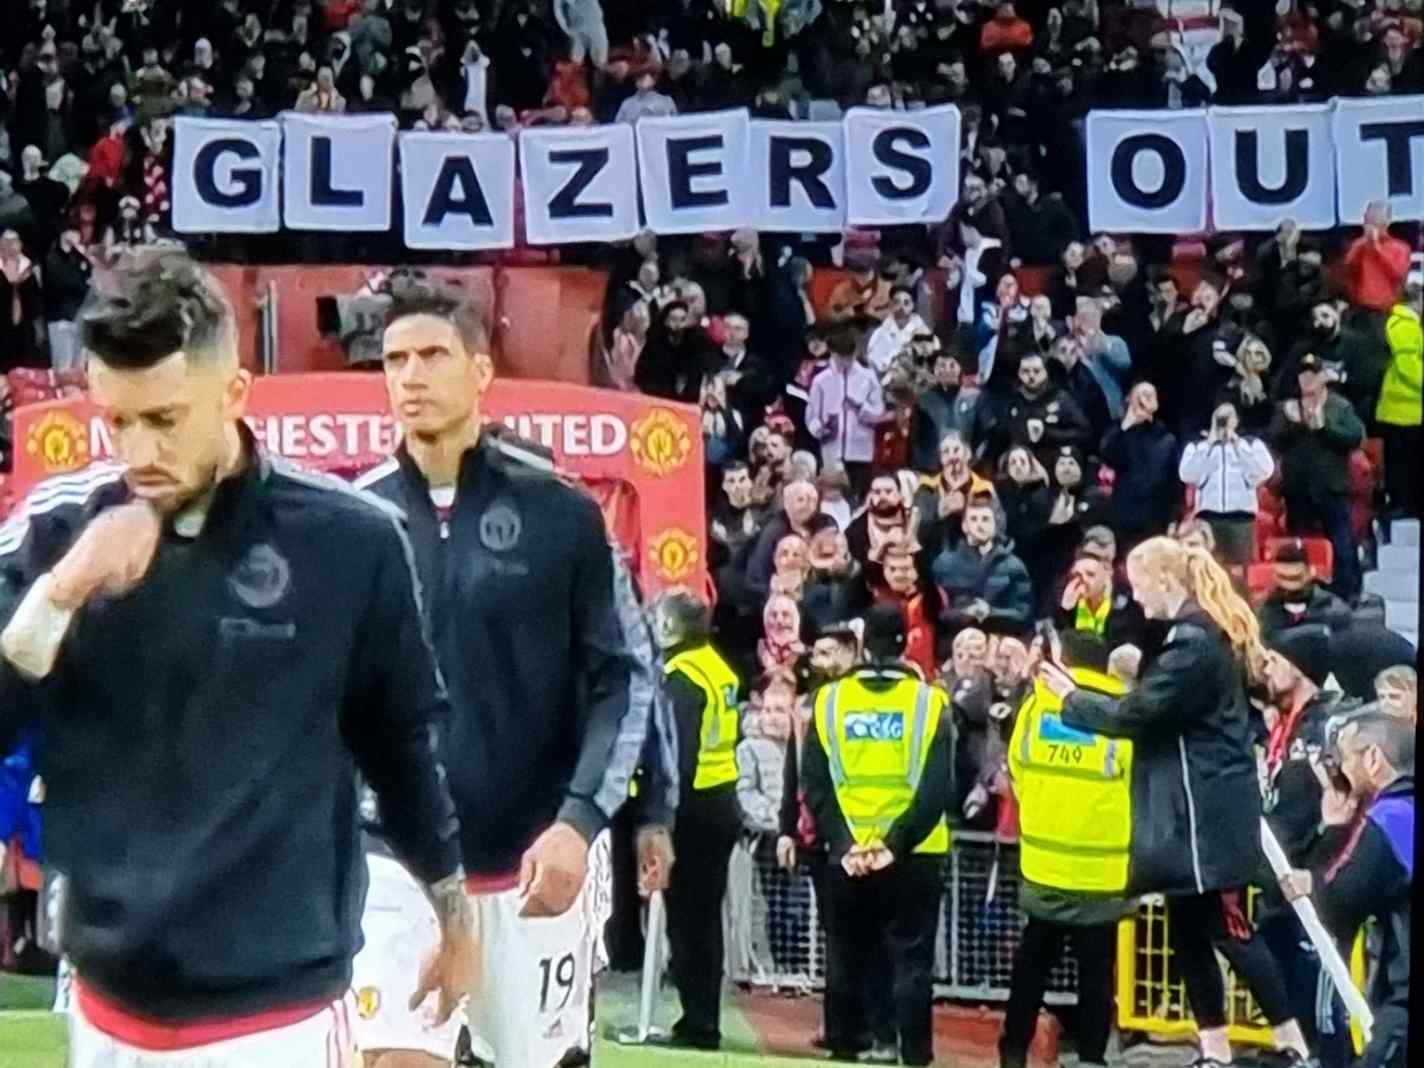 Man Utd fans show Glazers Out banner during Chelsea game